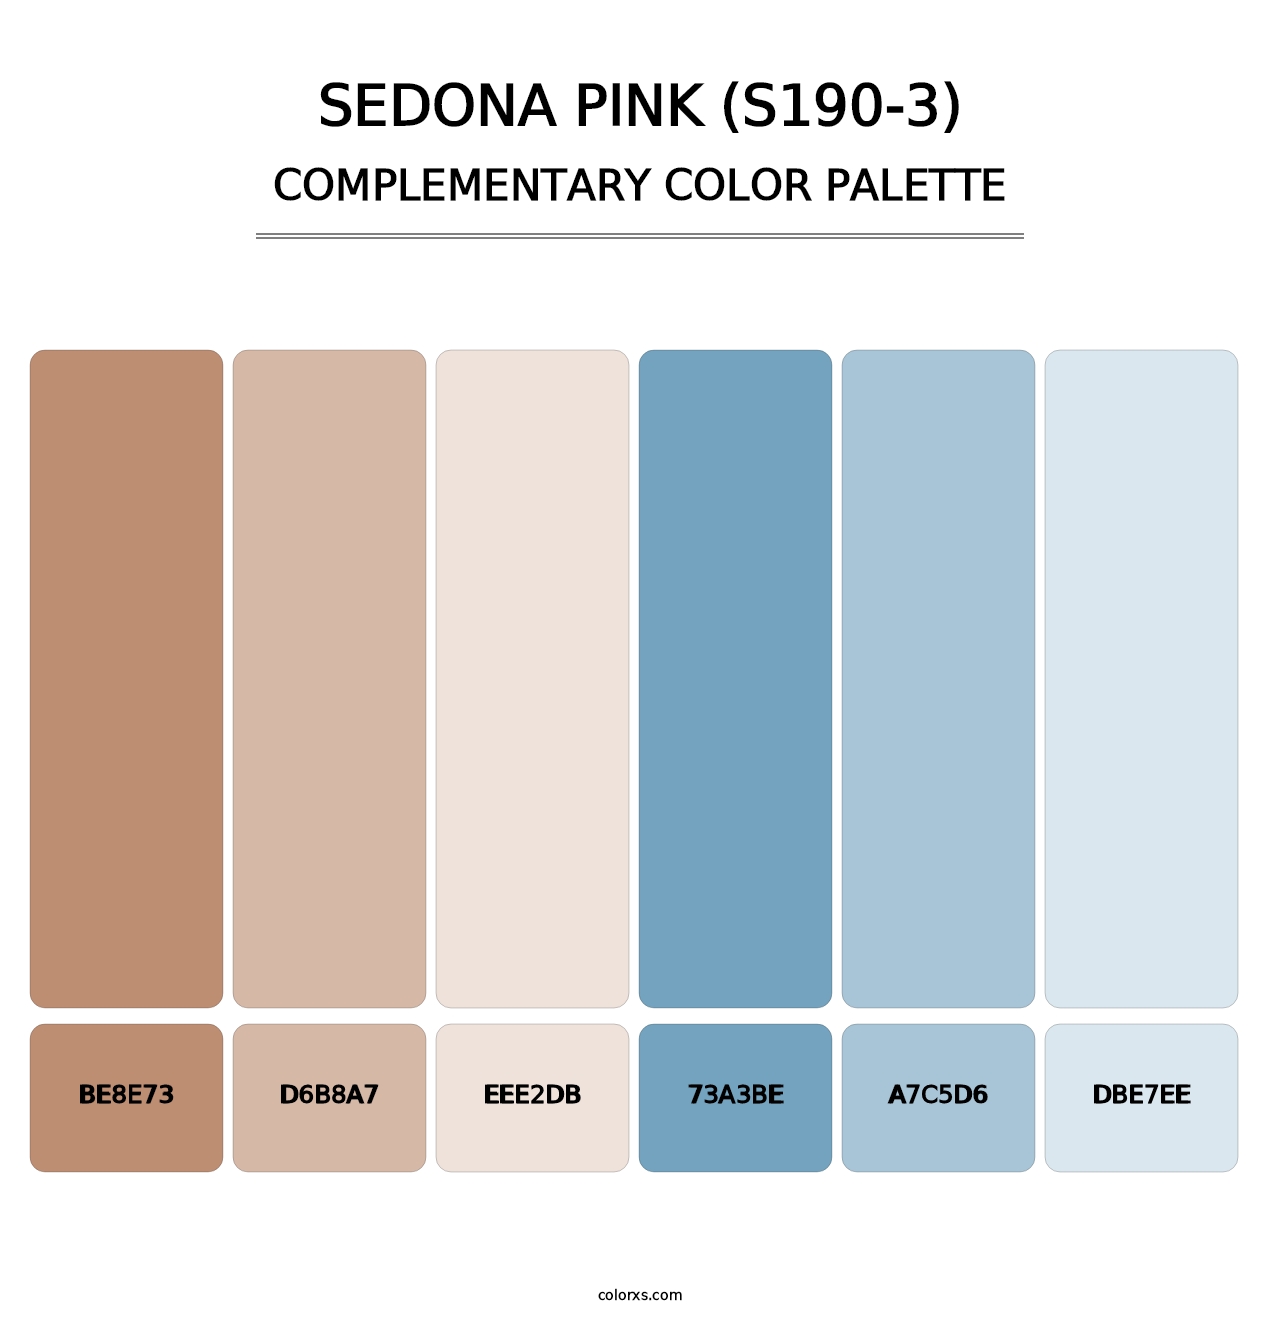 Sedona Pink (S190-3) - Complementary Color Palette